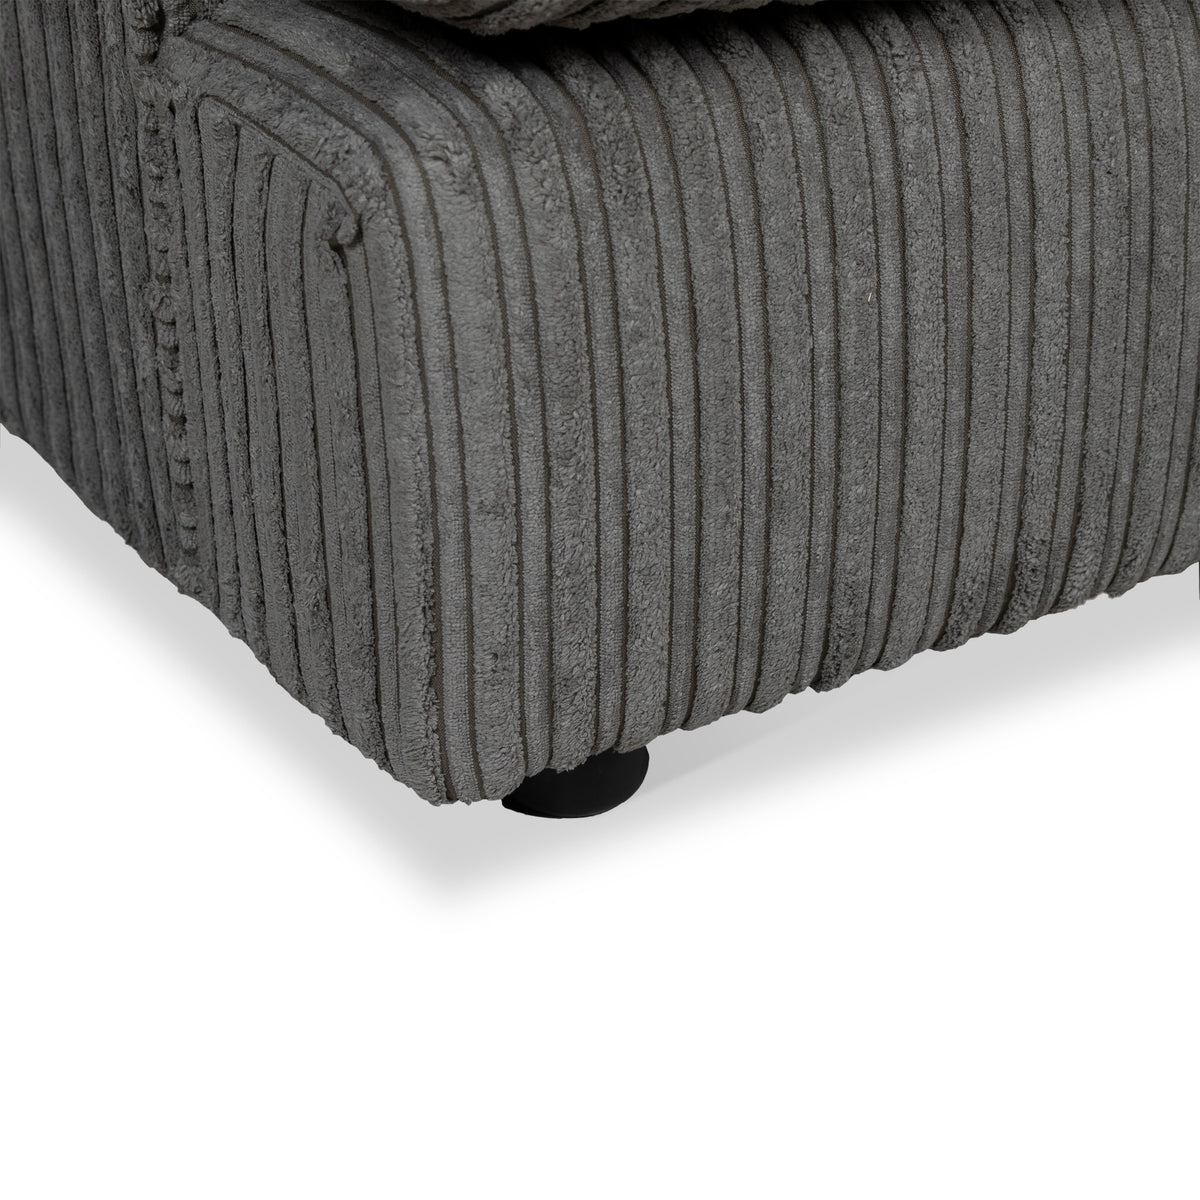 Bletchley Charcoal Jumbo Cord Corner Sofa from Roseland Furniture